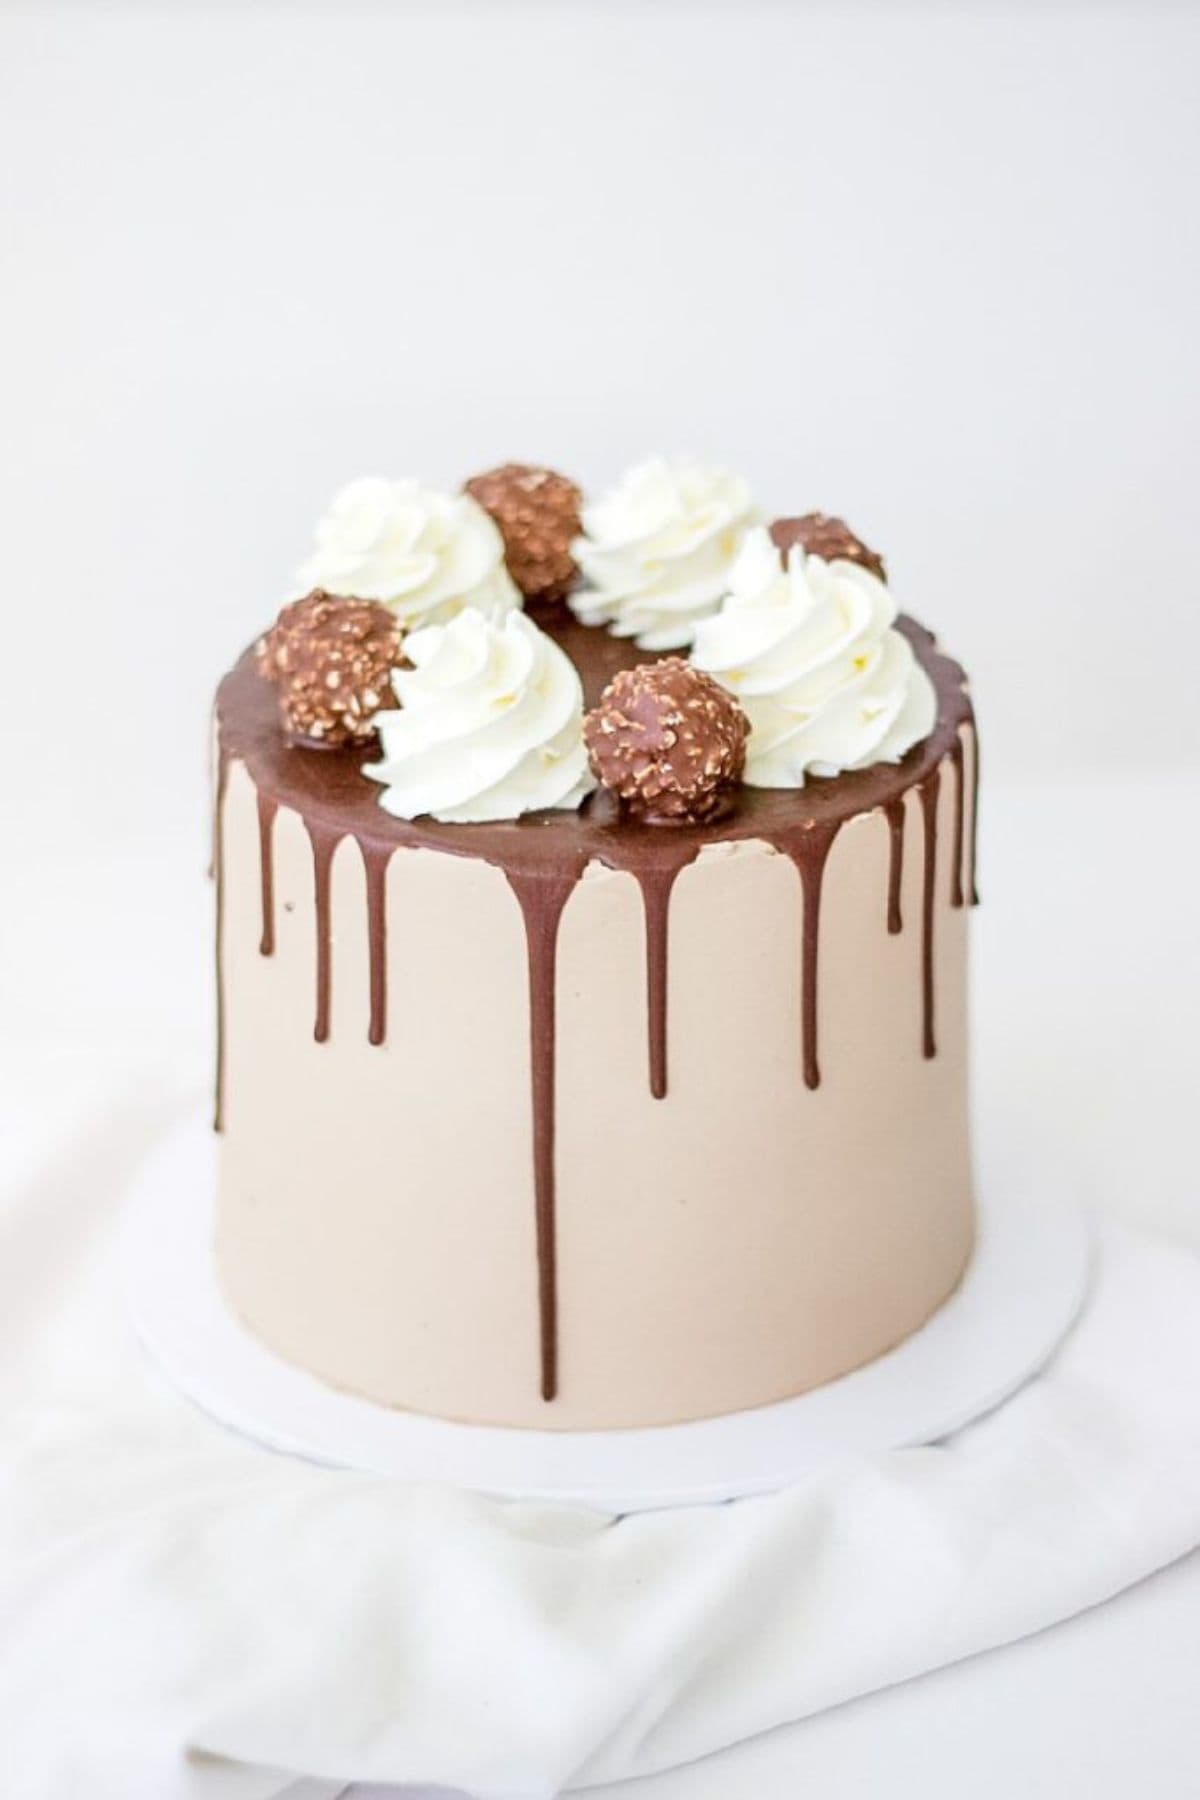 front view of nutella cake